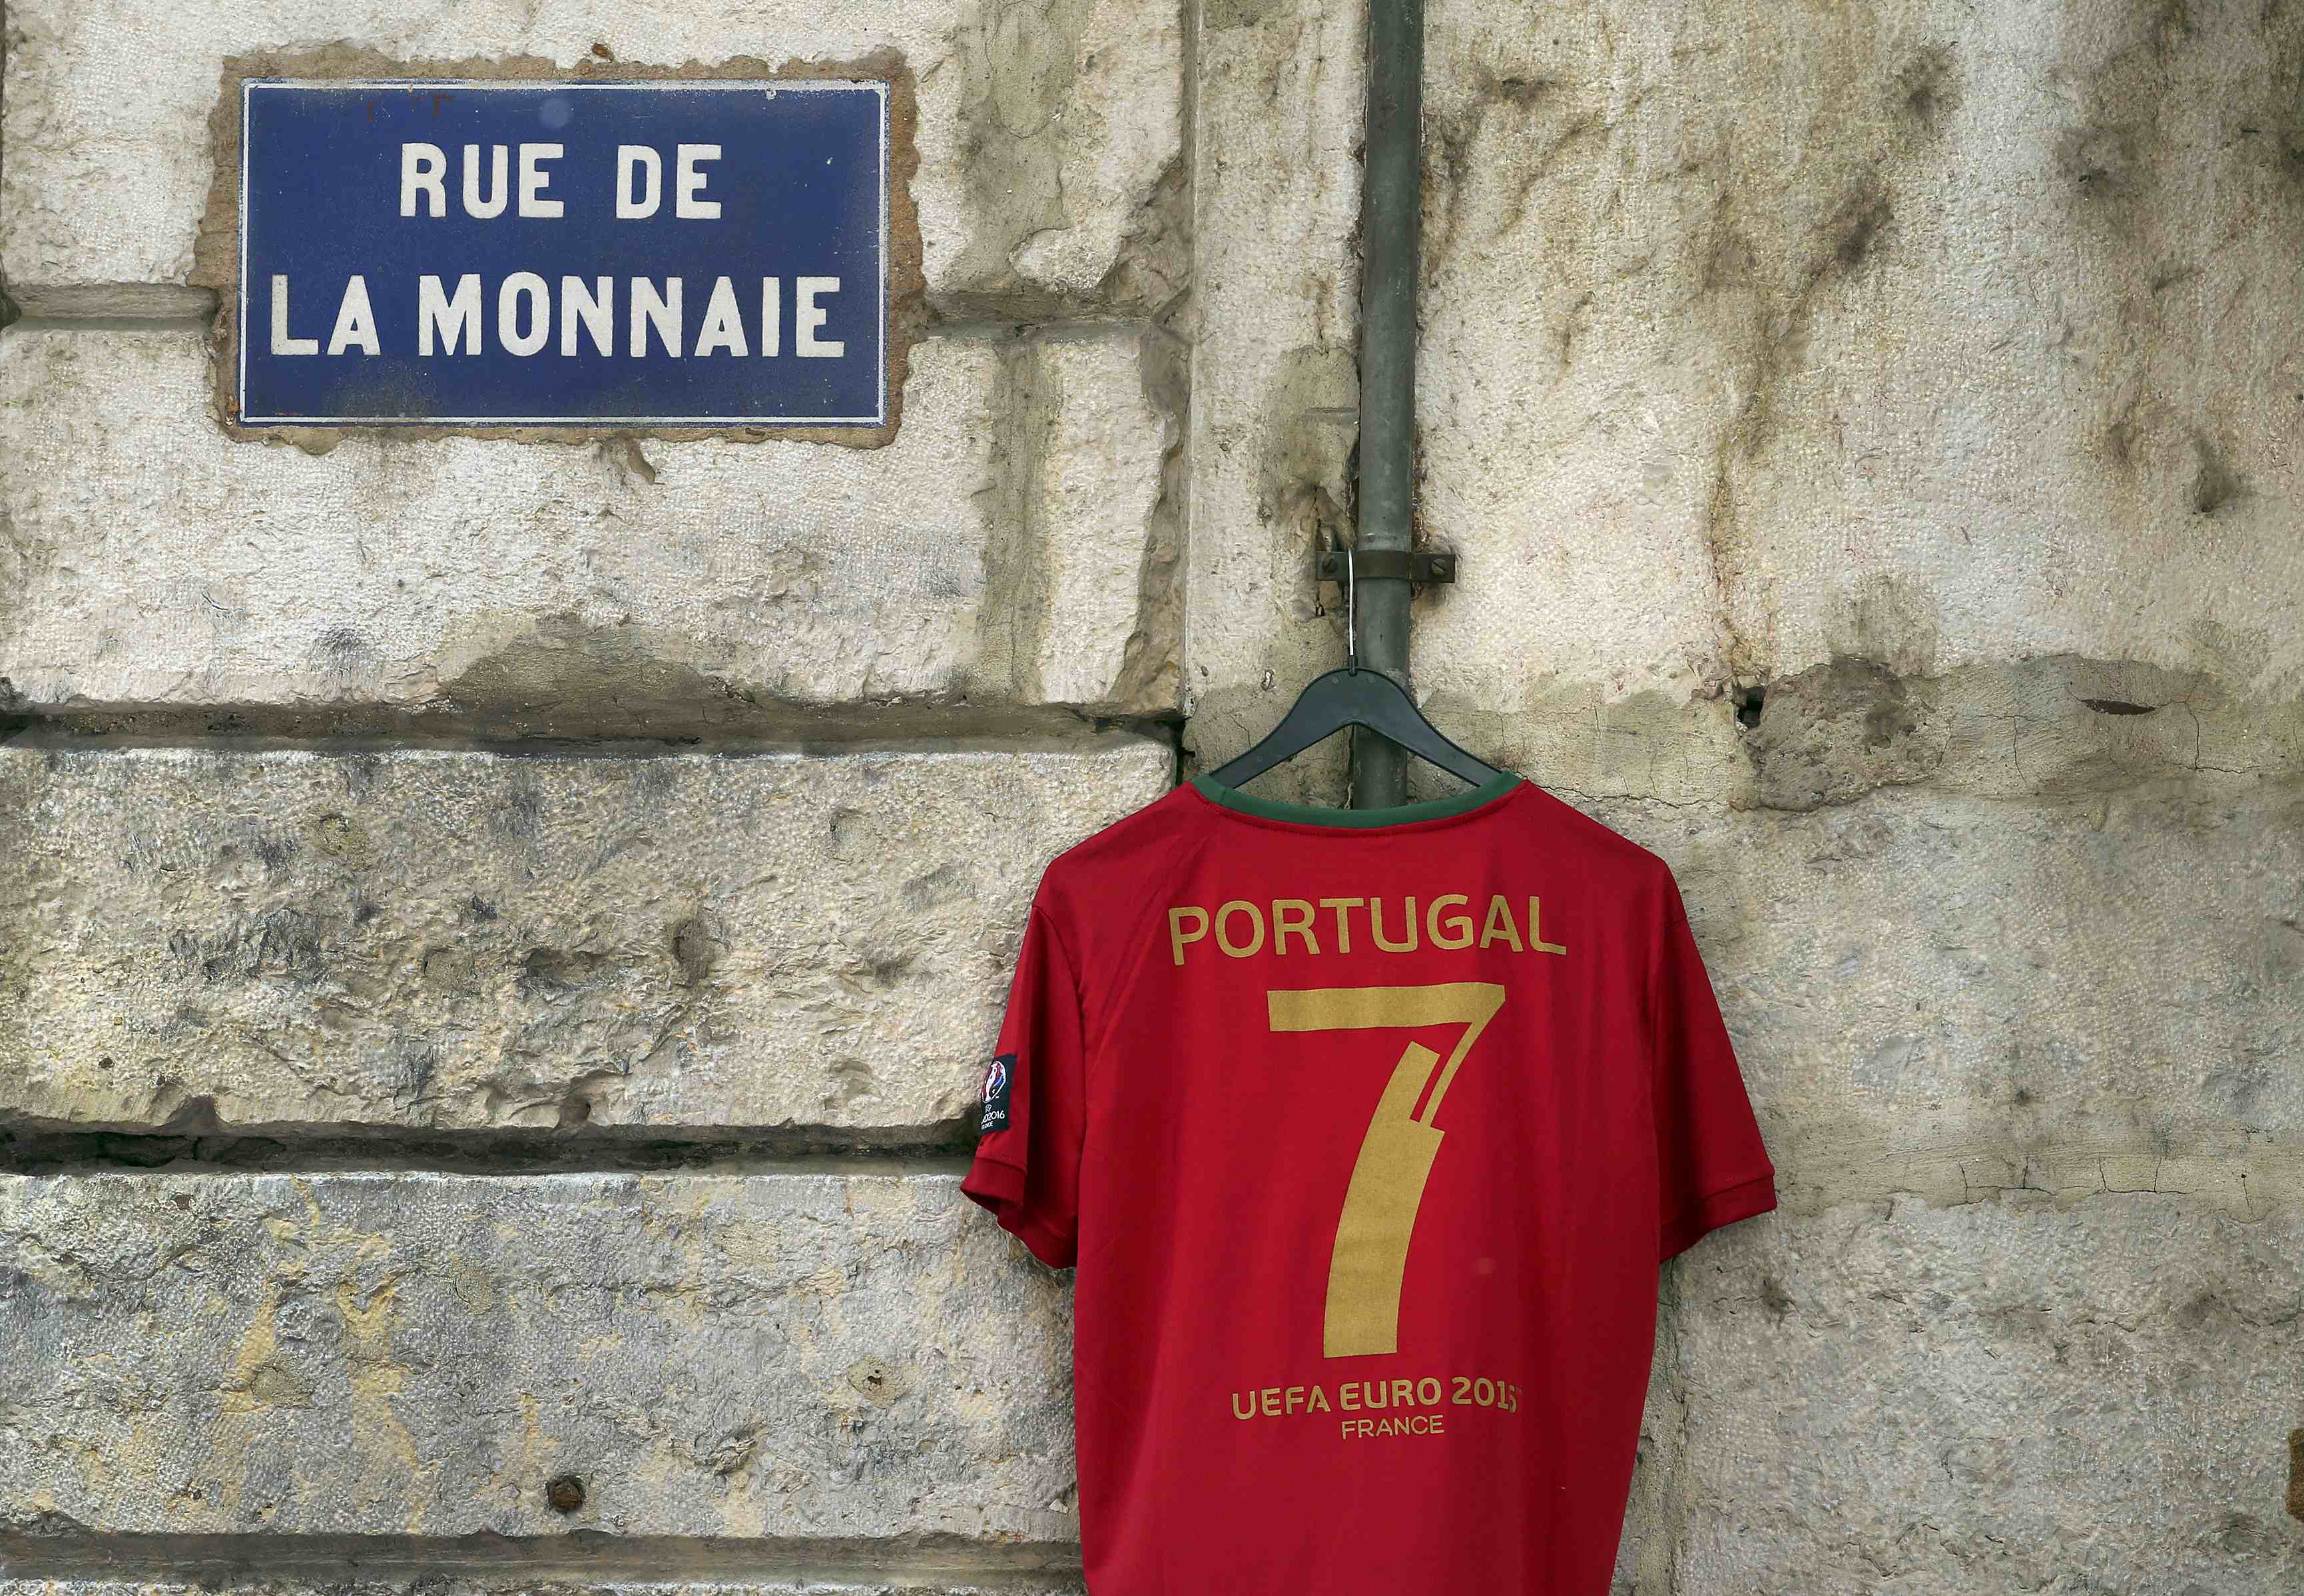 Football Soccer - Wales v Portugal - Euro 2016 - Semi final - Lyon, France - 6/7/16 - A Portugal team T-shirt for sale is seen hanging outside a cafe in Lyon before the semi-final against Wales. REUTERS/Stefano Rellandini